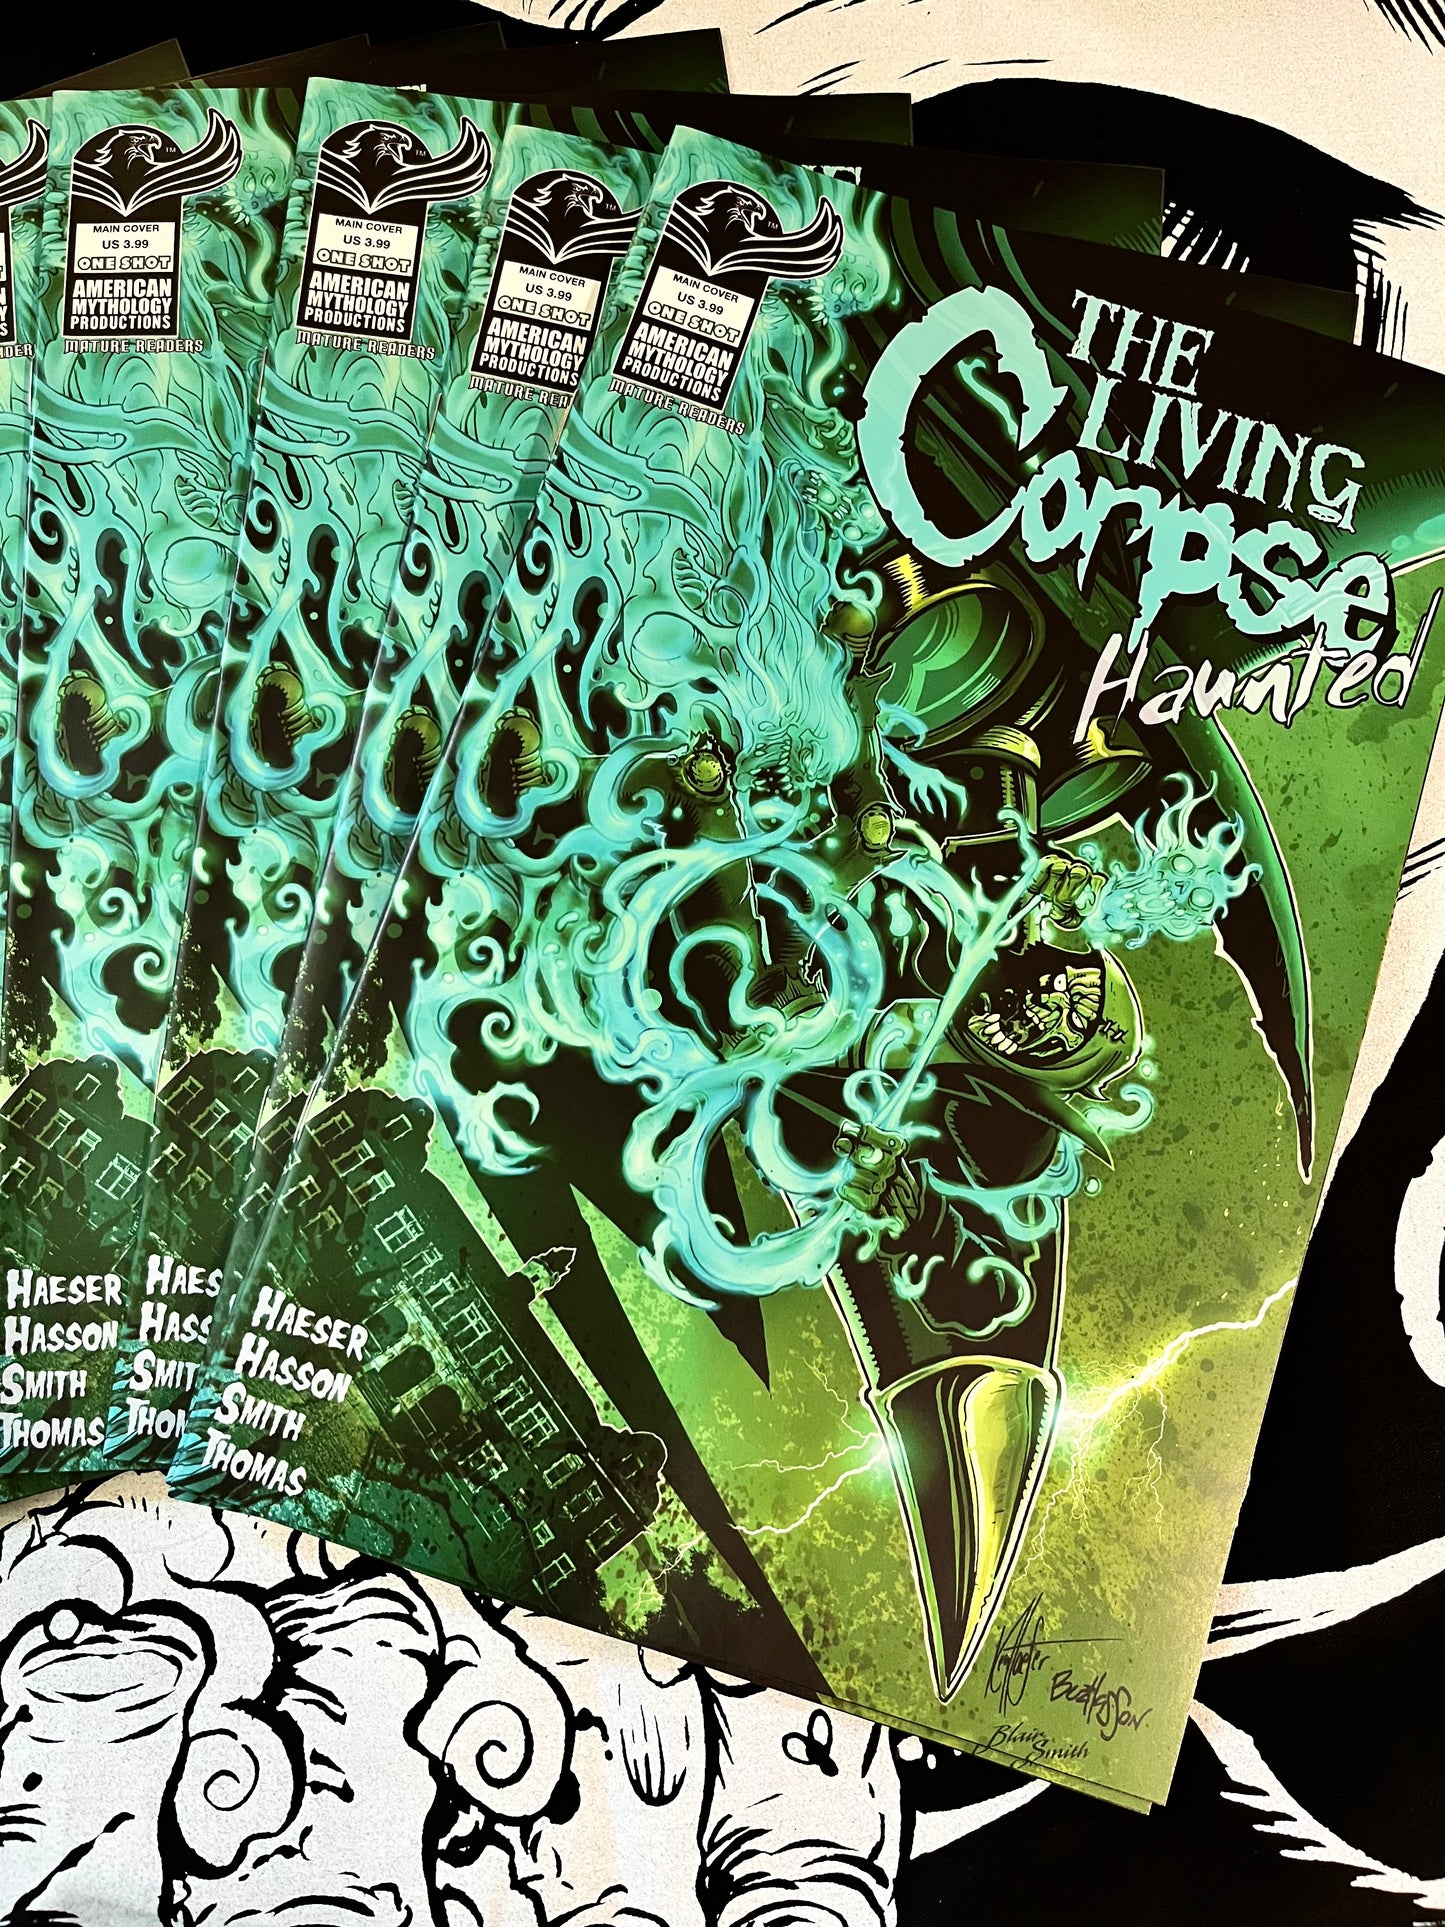 The Living Corpse: Haunted (limited print run)